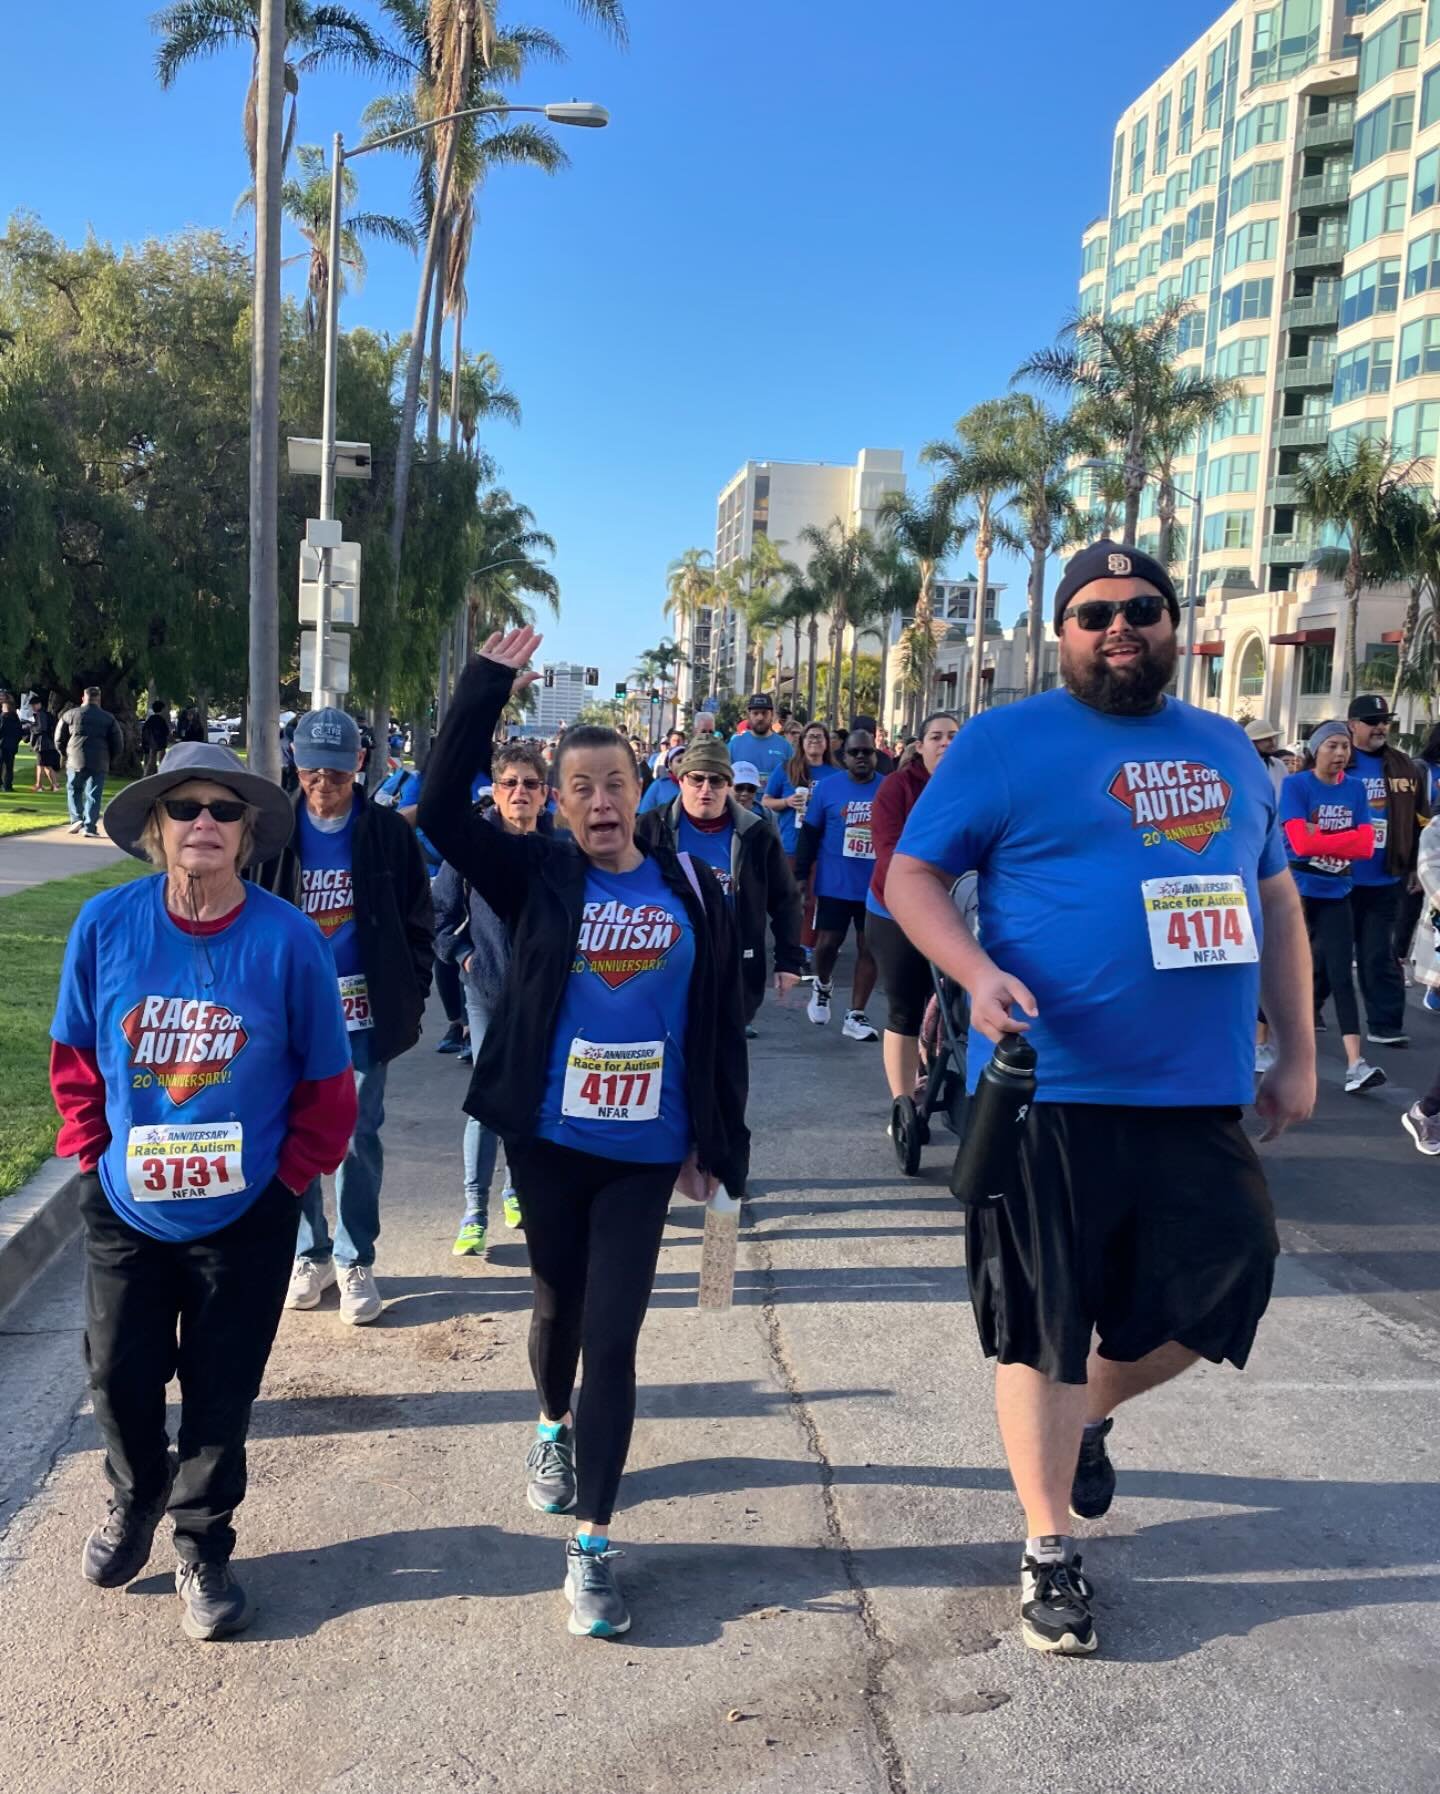 Had a great time at the #raceforautismsandiego this past Saturday @balboapark. Thanks to all who came out and jogged/walked with team @villadevidaofficial !